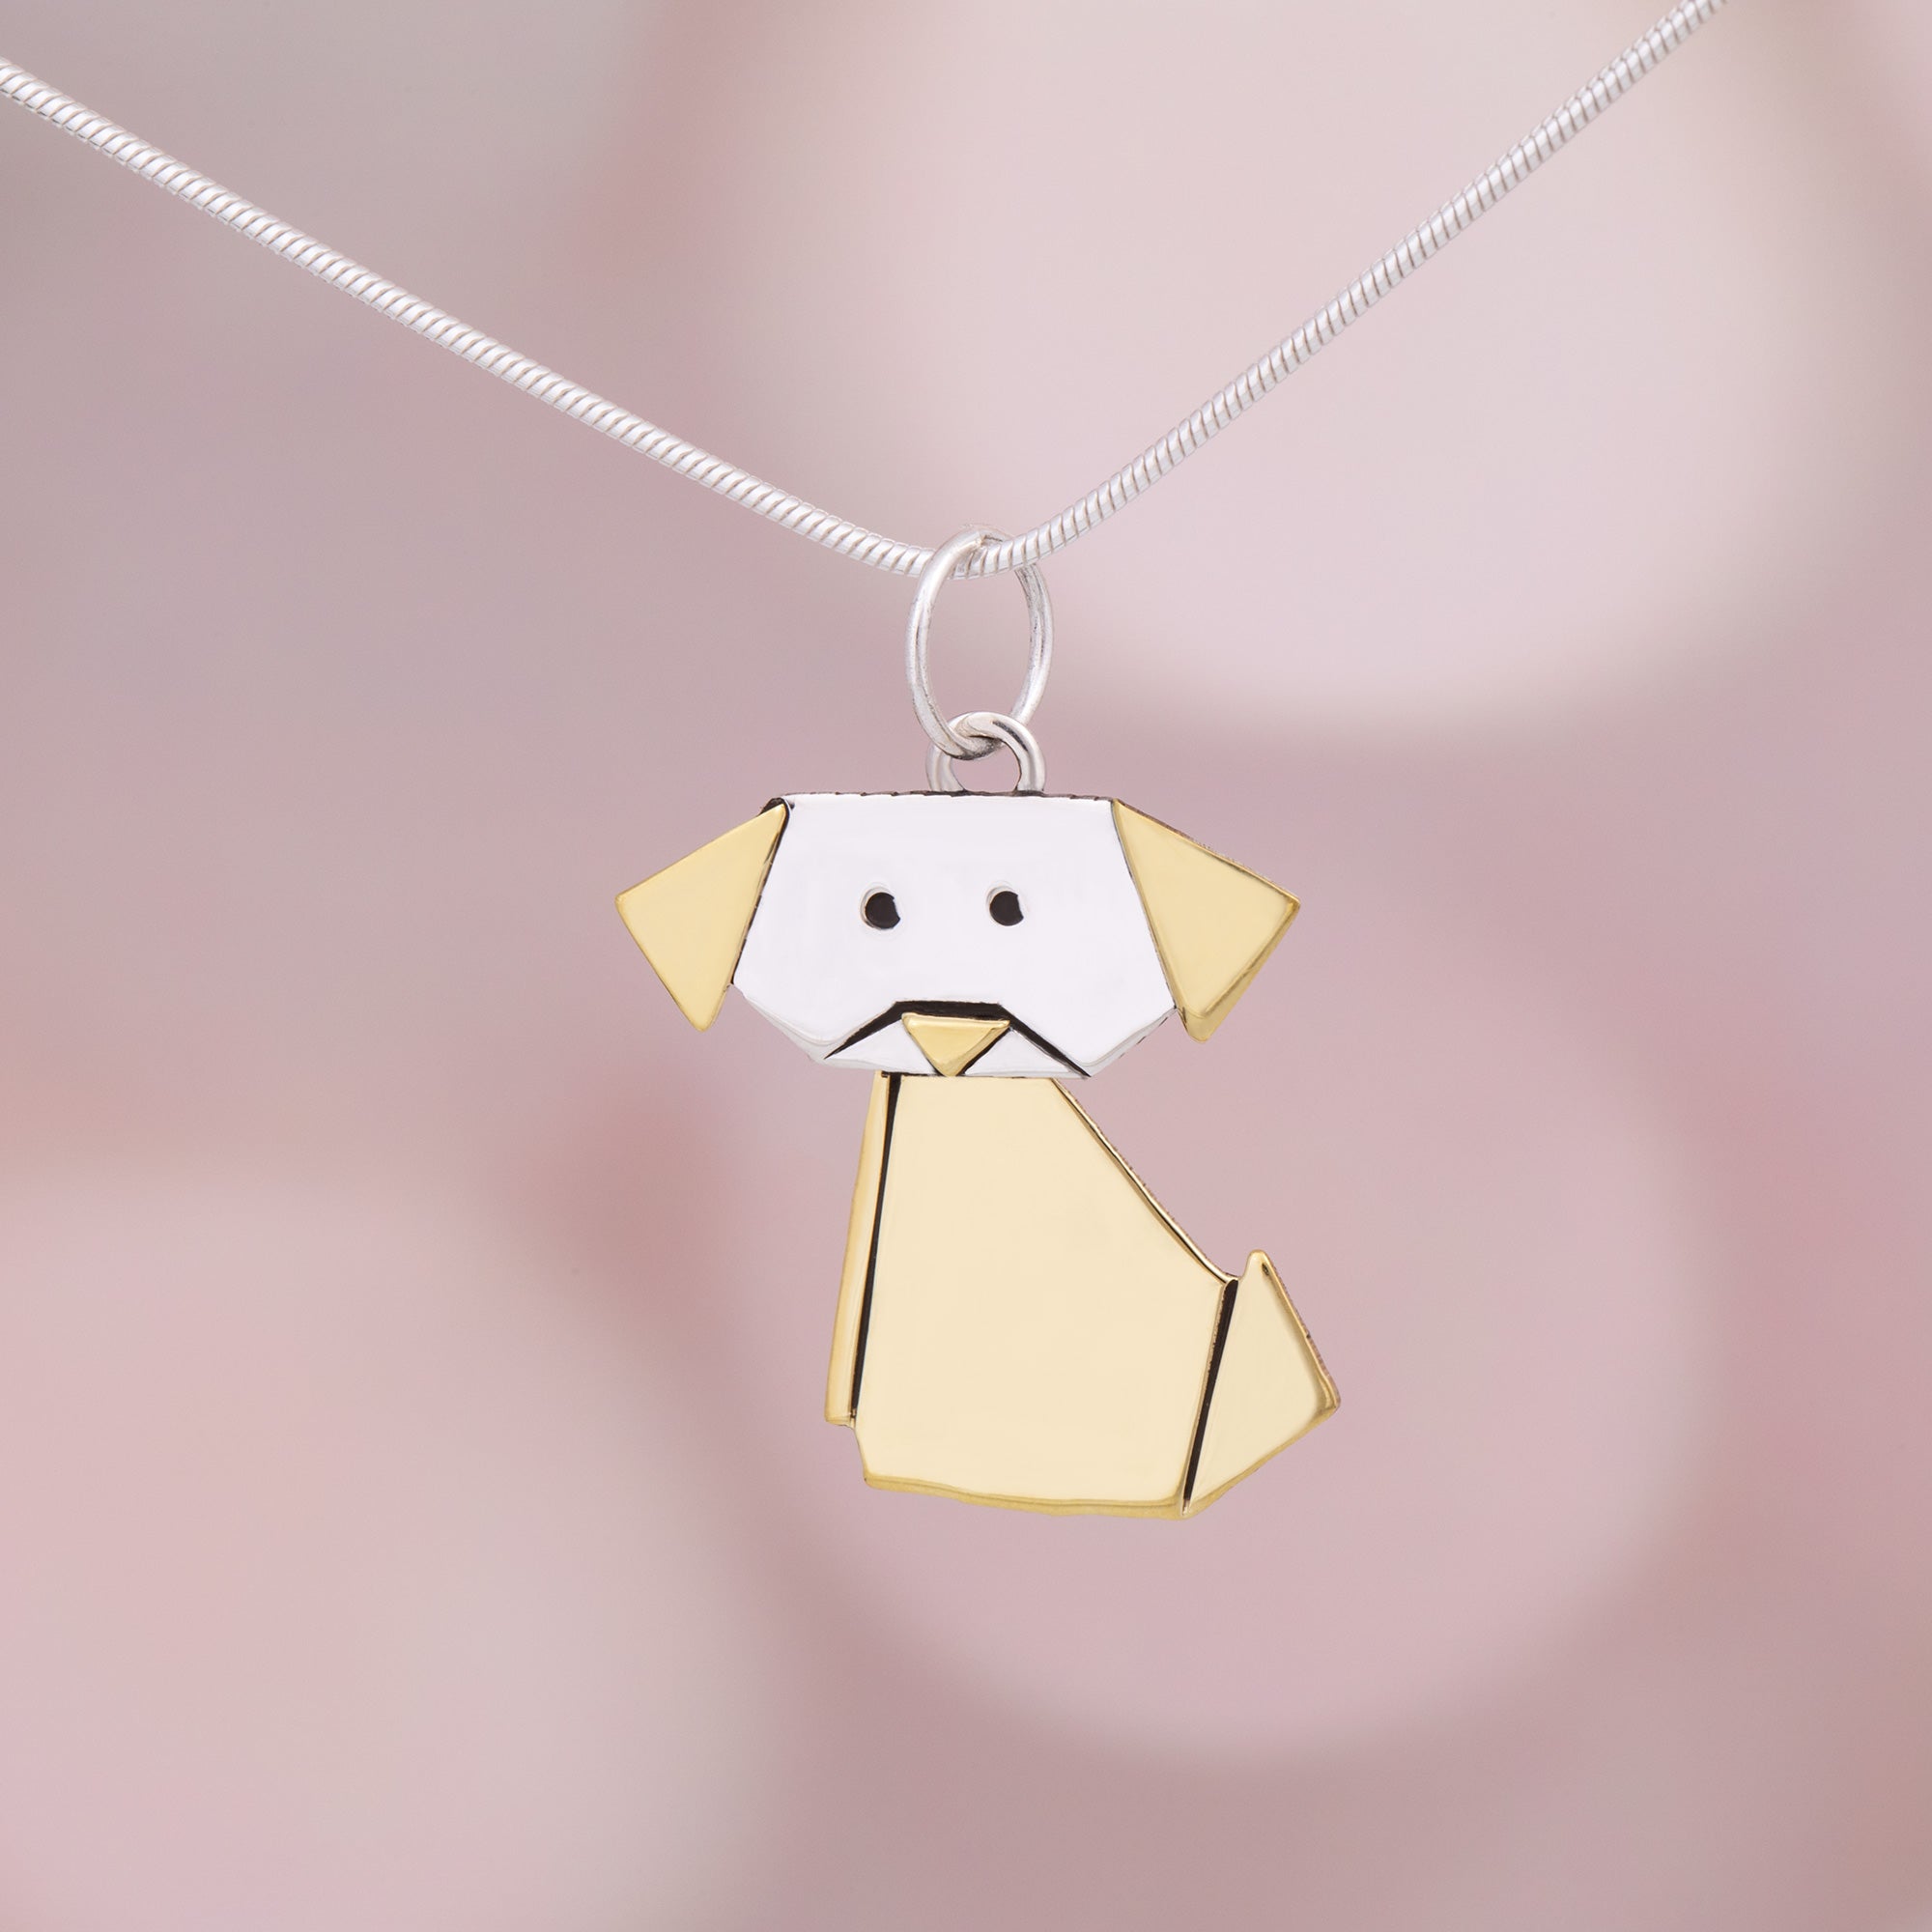 Origami Pet Necklace - Dog - With Sterling Cable Chain